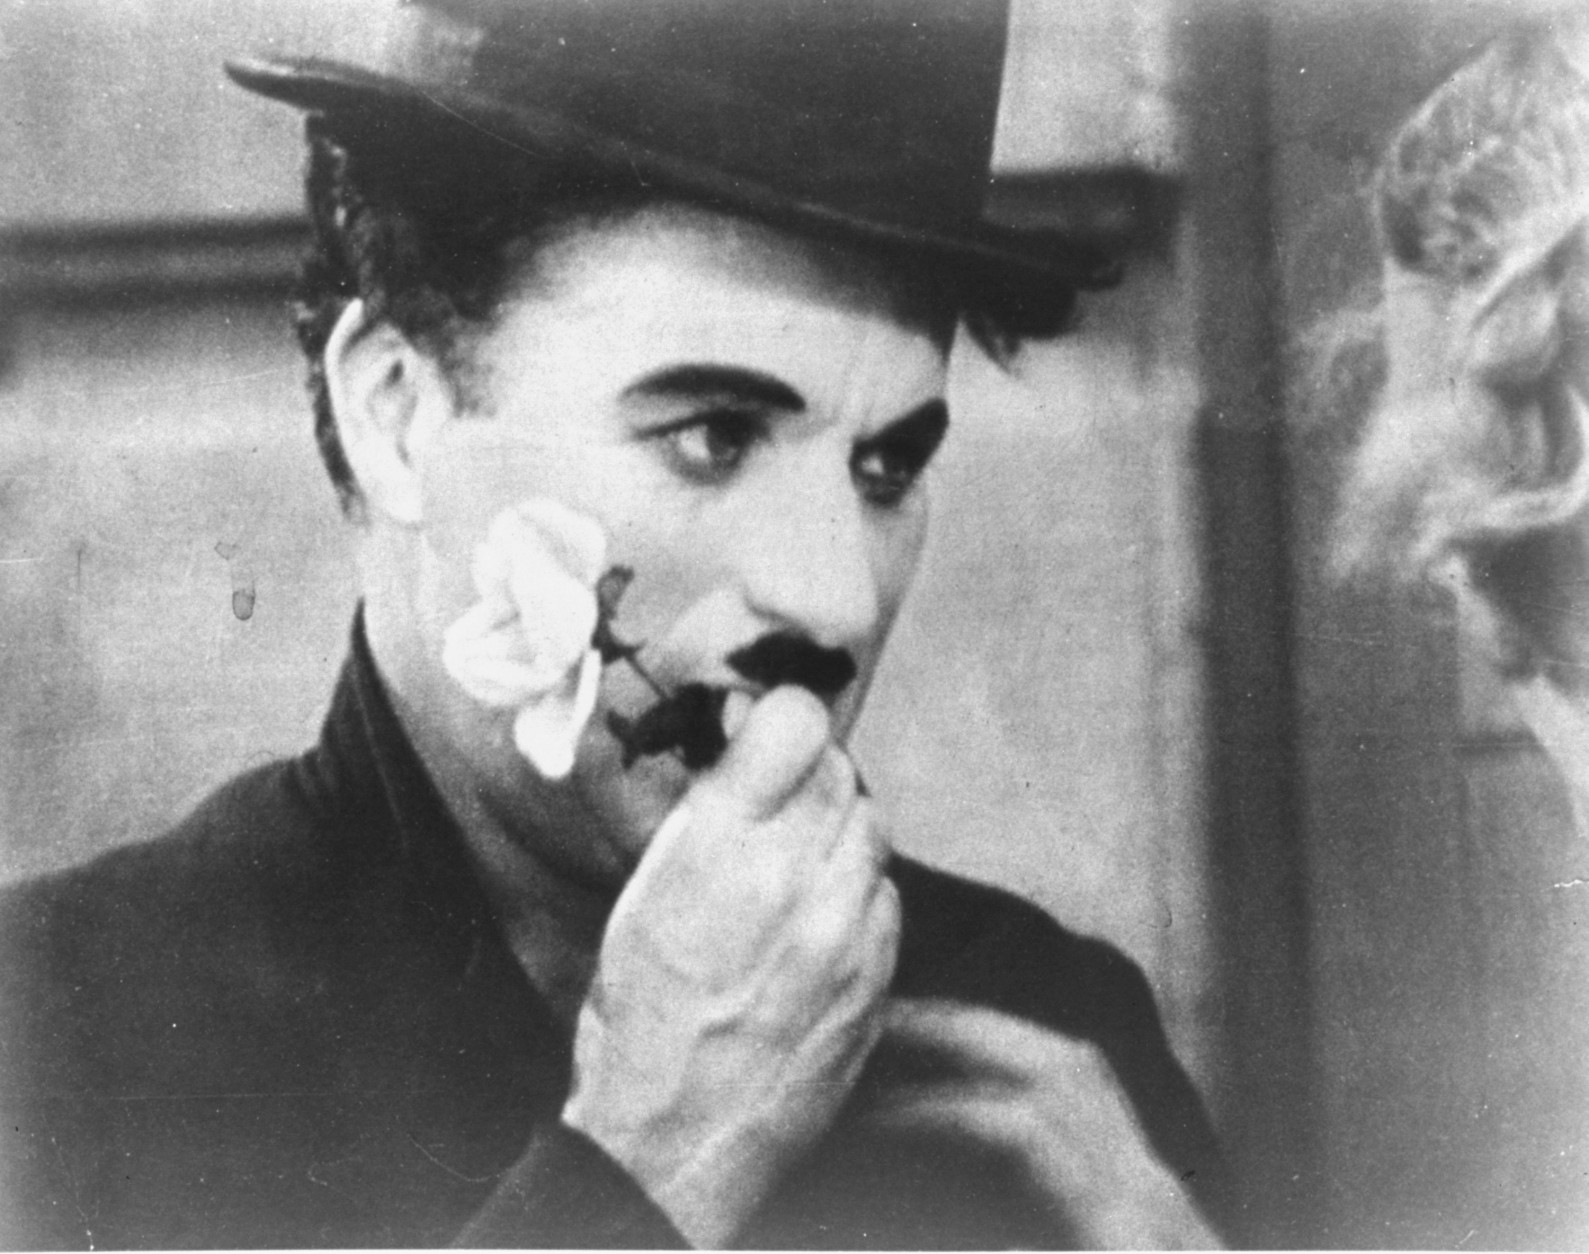 ** FILE ** Charlie Chaplin holds a rose in this photo from the final scene in his 1931 silent film "City Lights".   The film is among the American Film Institute's best romantic comedy movies. (AP Photo)